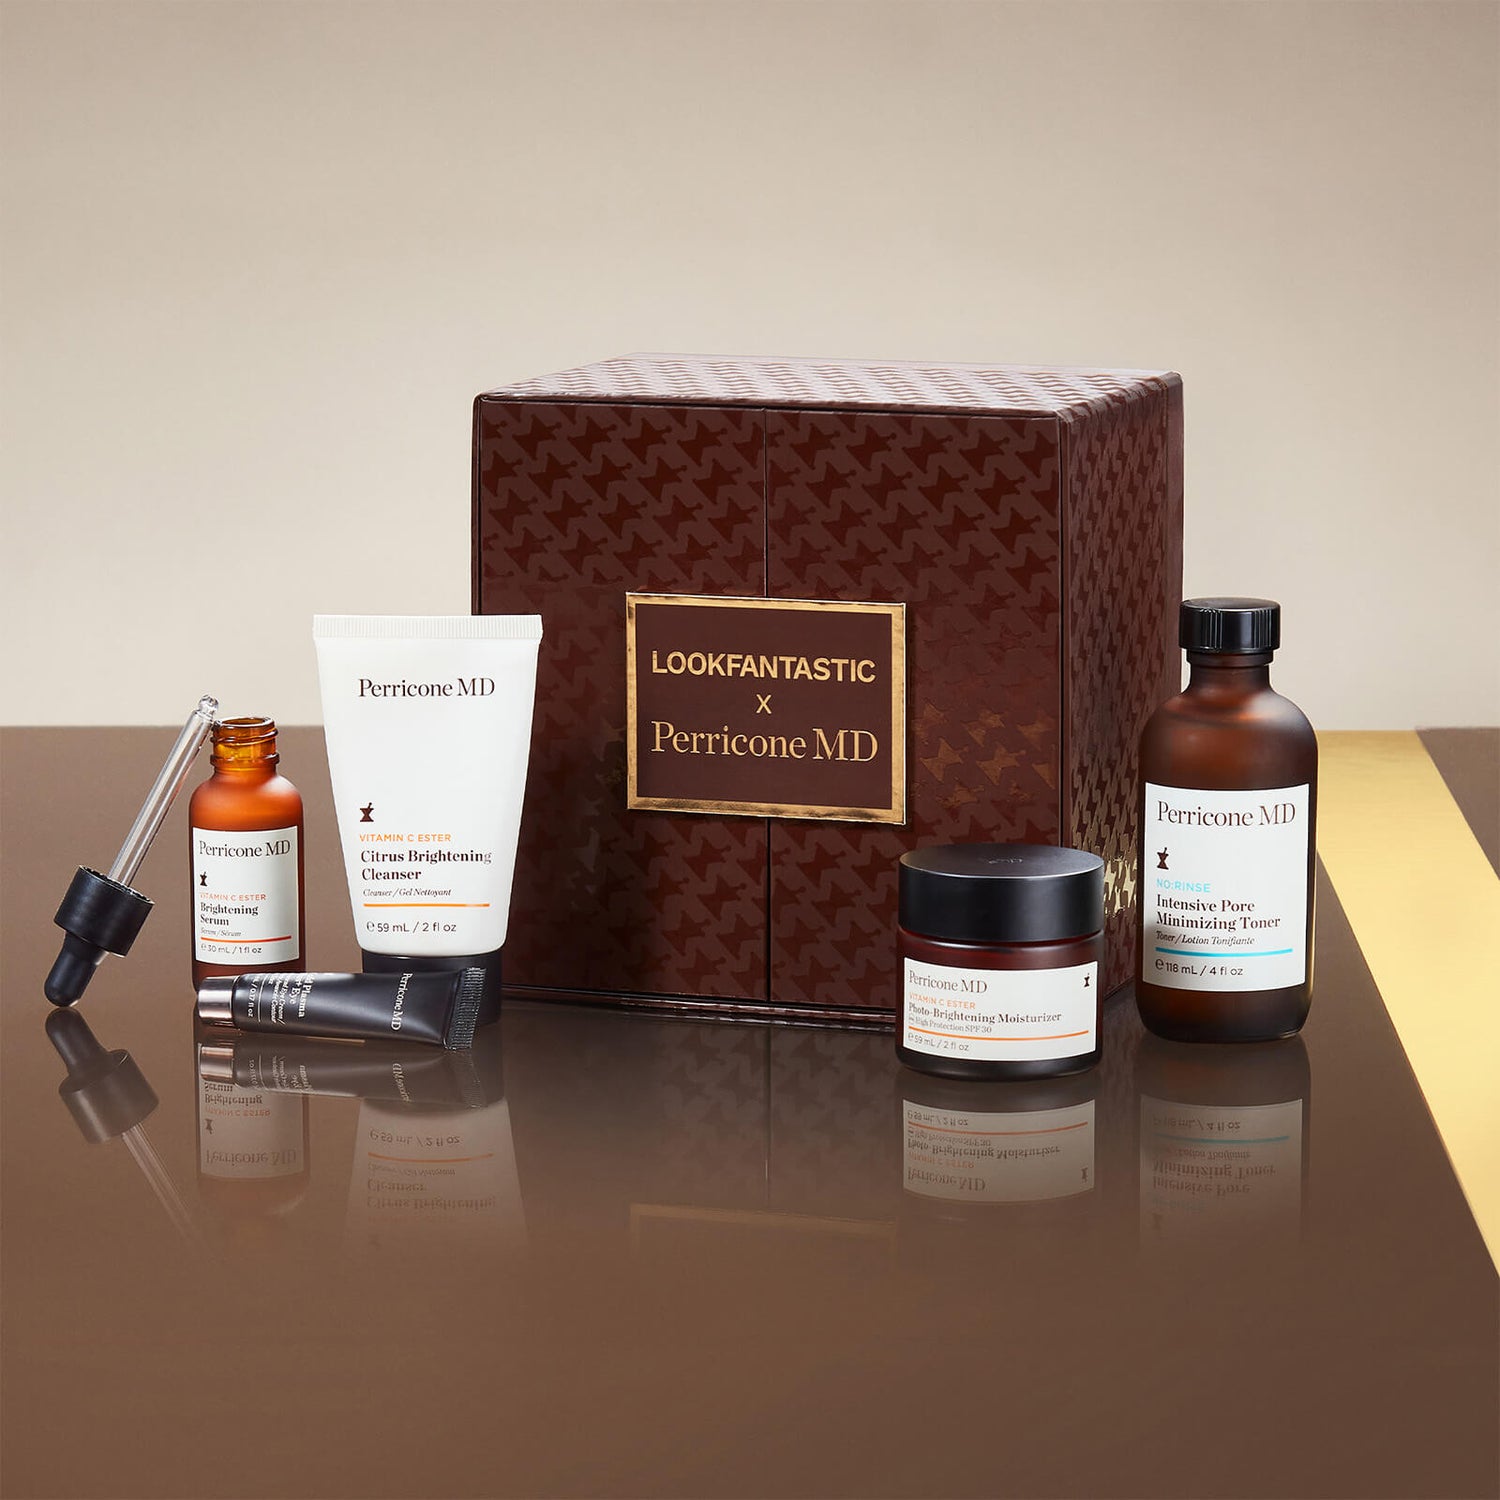 LOOKFANTASTIC x Perricone MD Limited Edition Beauty Box (Worth over $234)